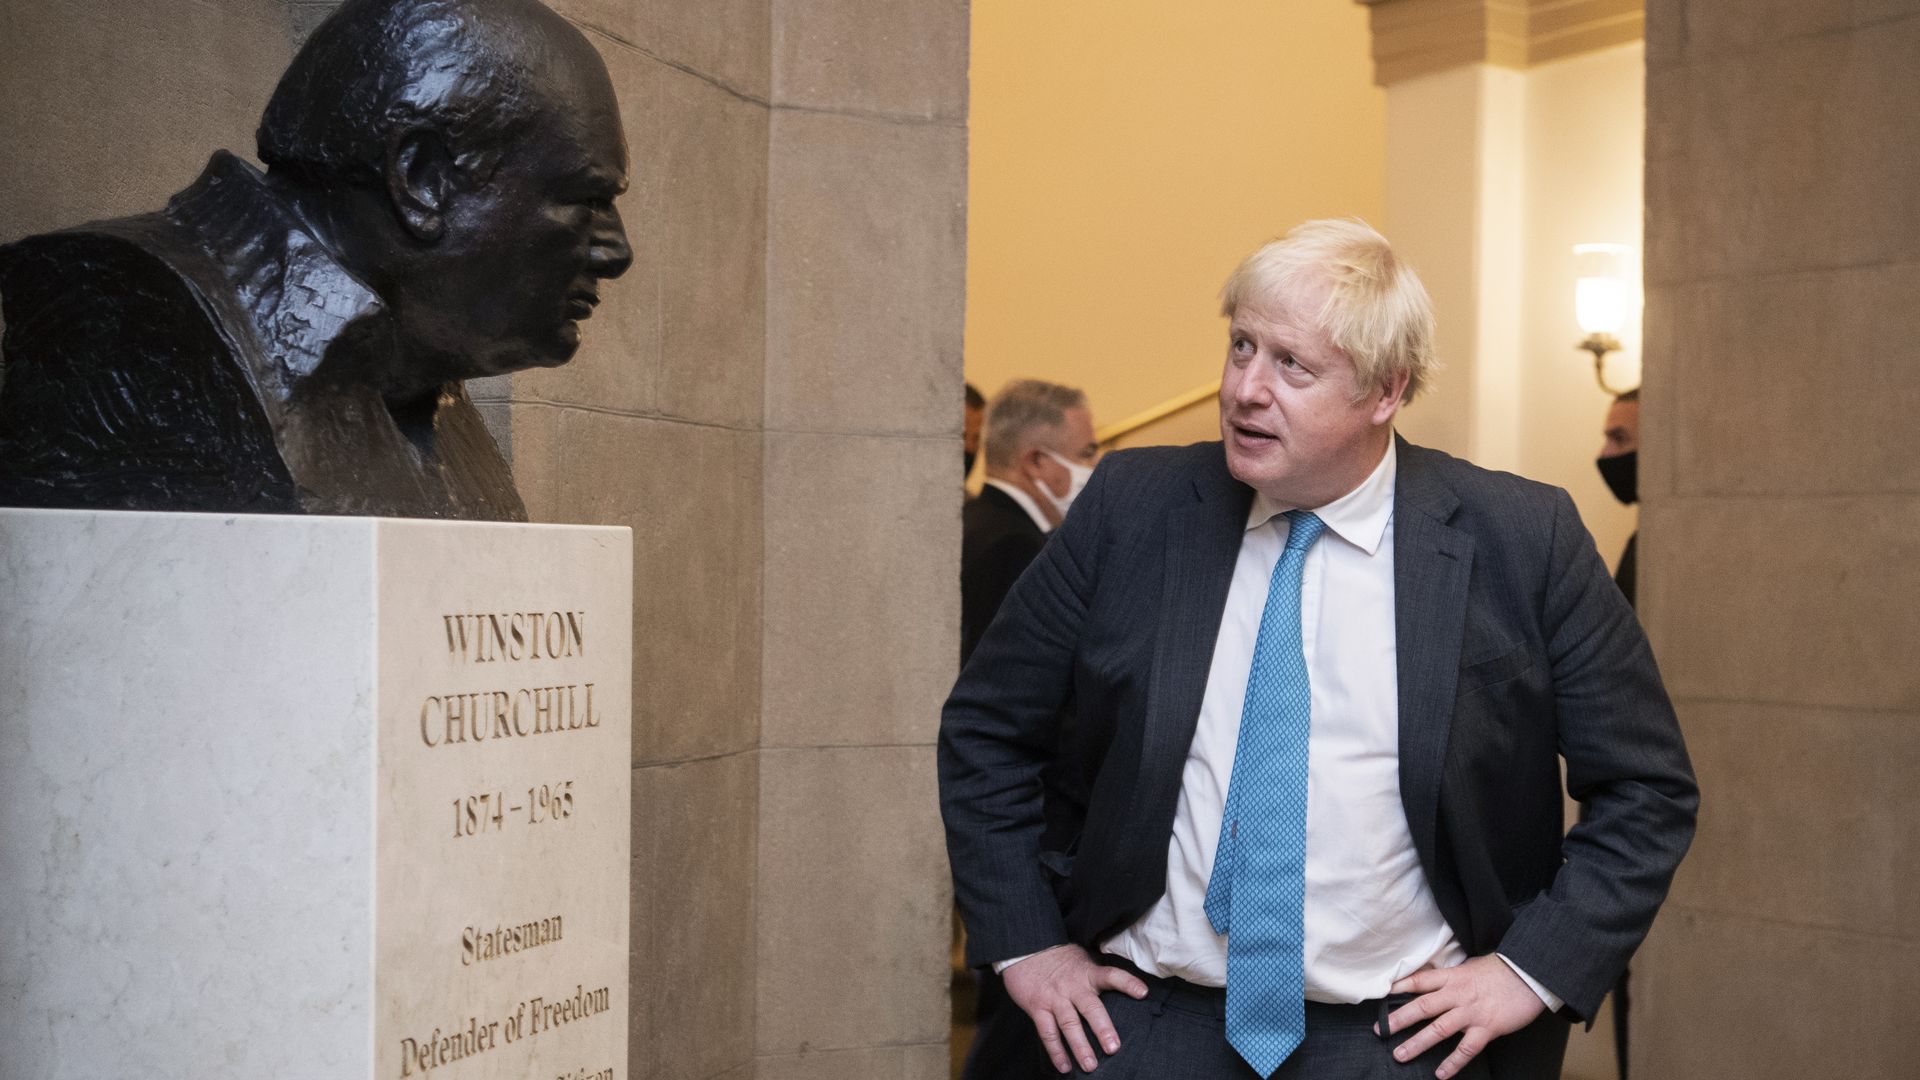 British Prime Minister Boris Johnson is seen looking at a bust of his predecessor Winston Churchill inside the U.S. Capitol.